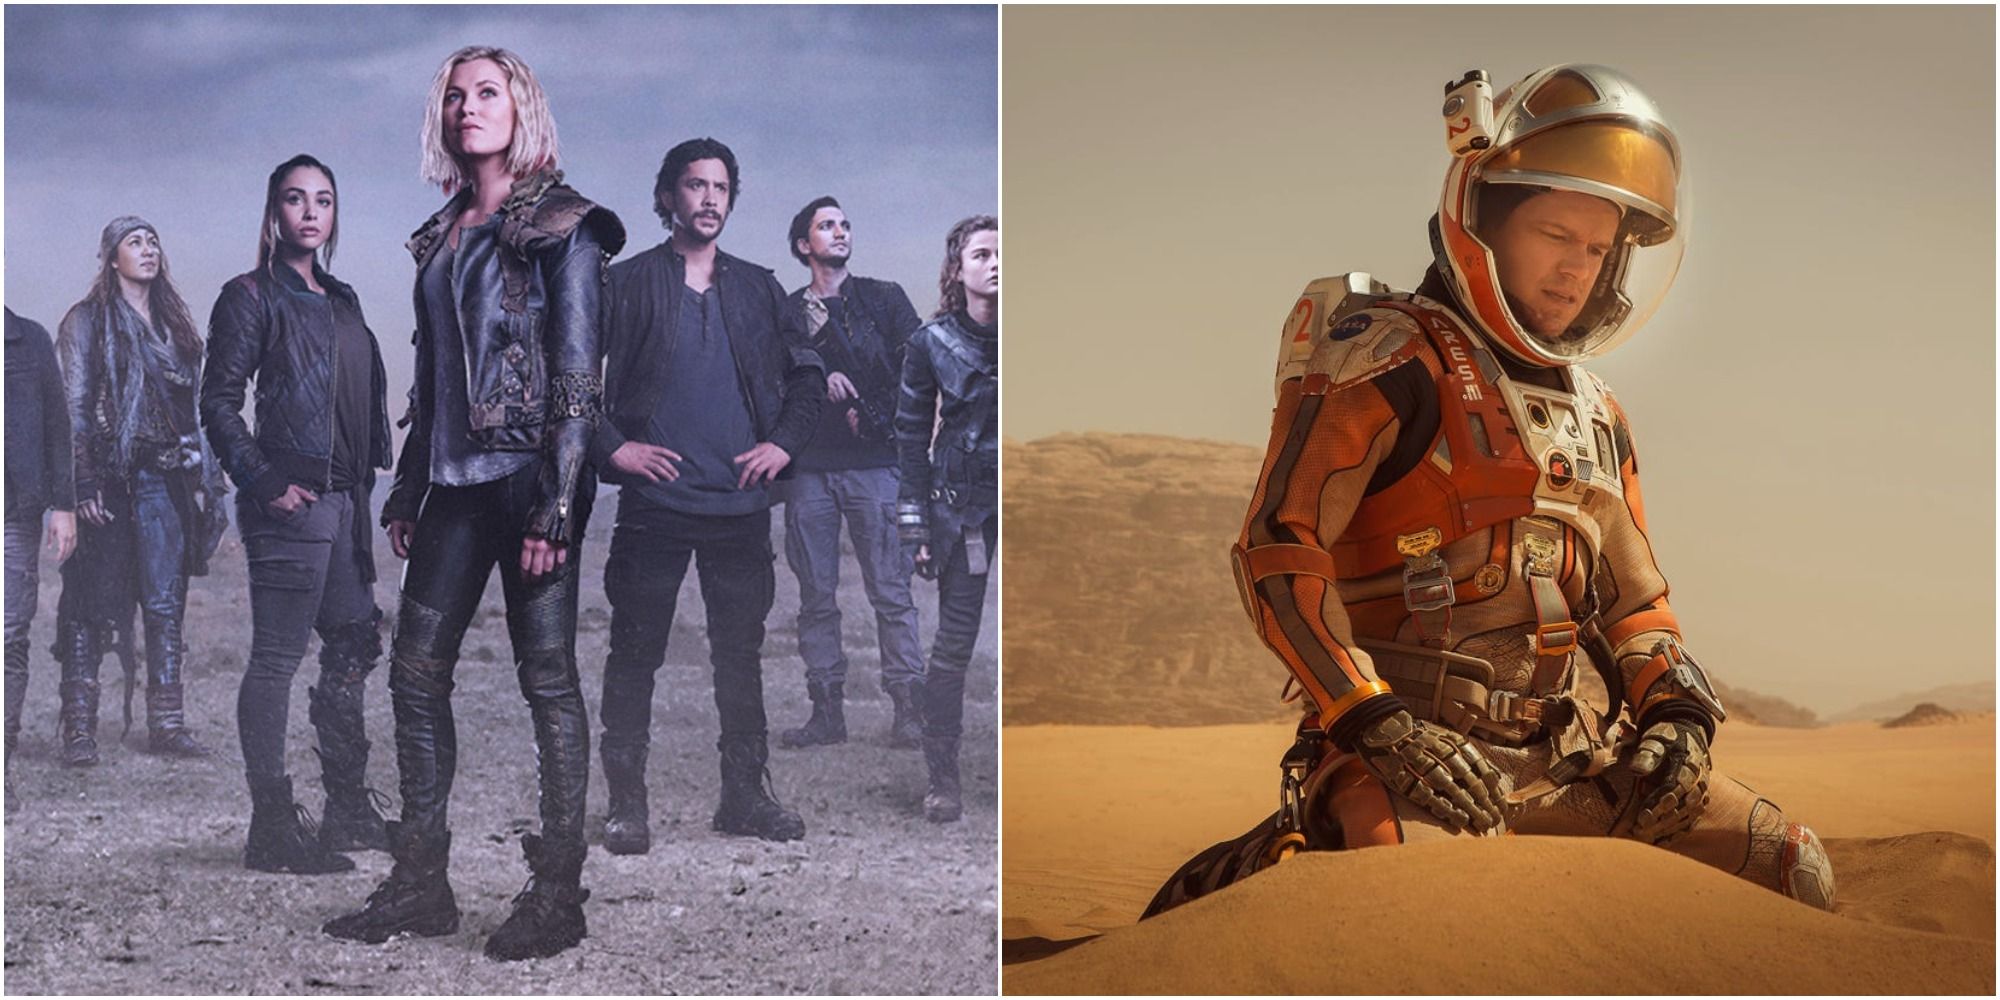 The 100 and The Martian